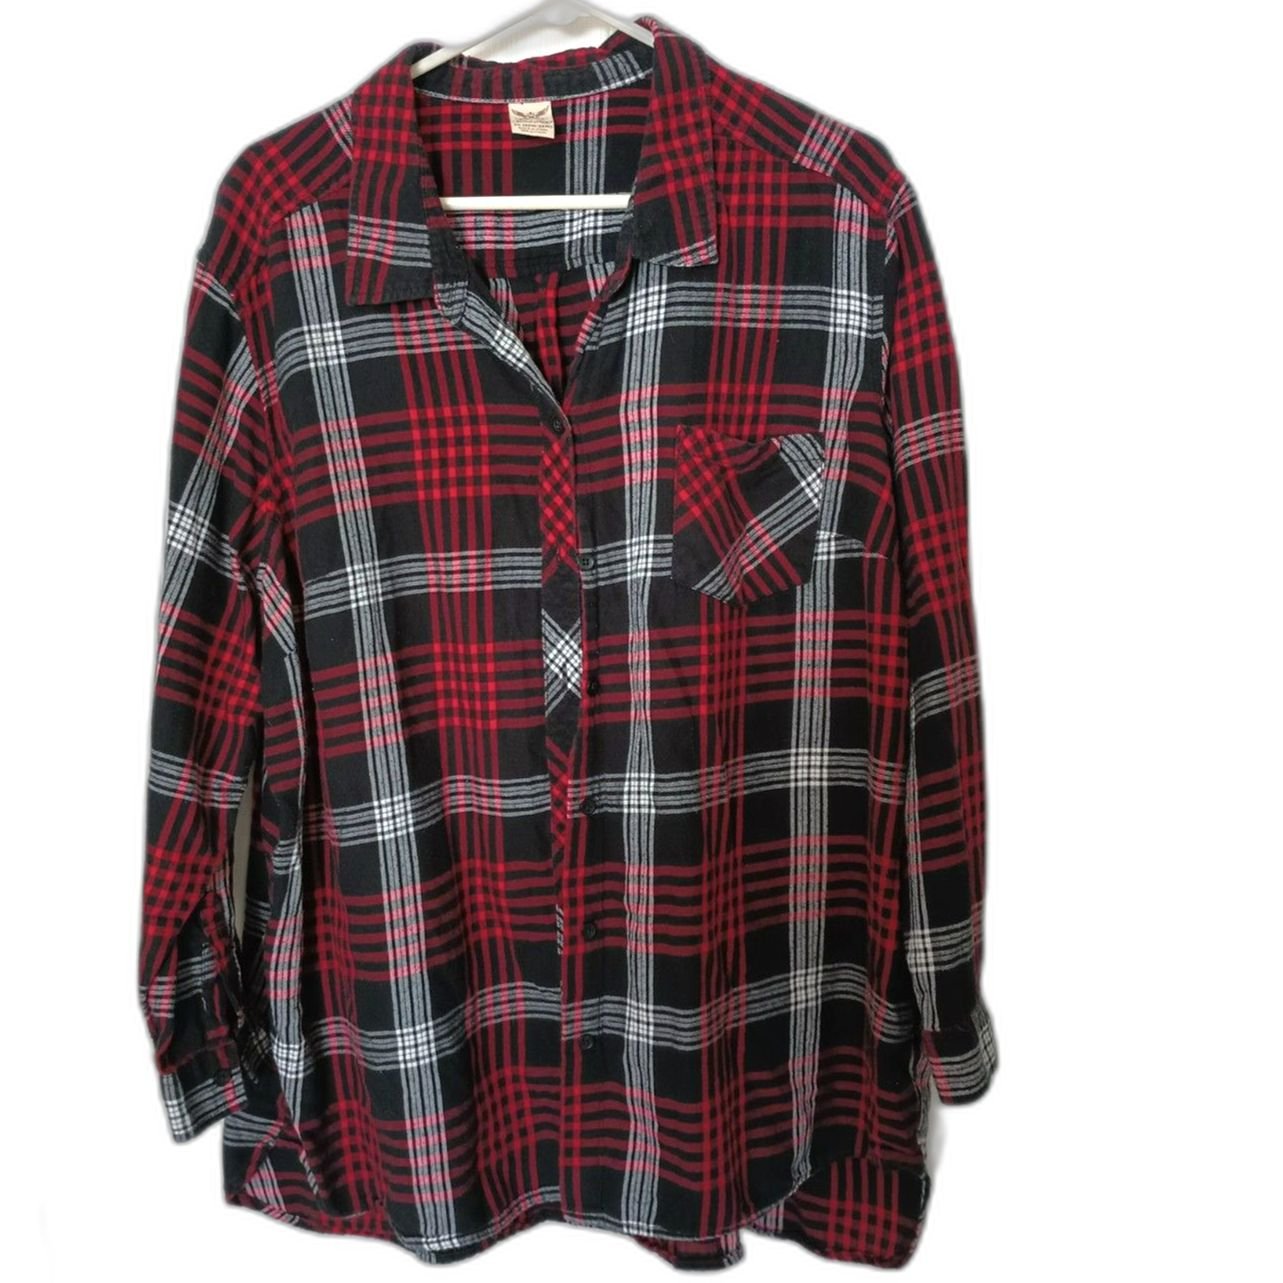 Beautiful Faded Glory Long Sleeve Flannel Red Plaid Womens Size 3X 22W-24W LvY8jJpgR well sale